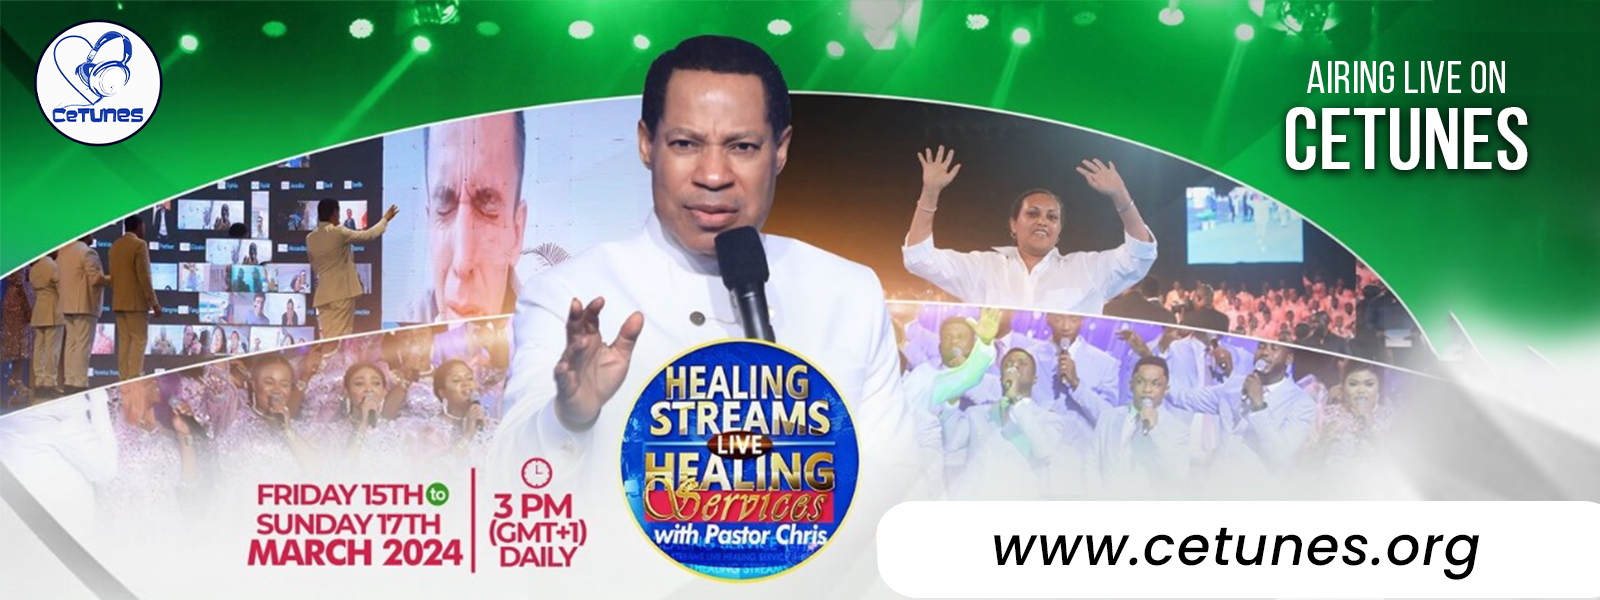 IT'S THE HEALING STREAMS LIVE HEALING SERVICE WITH OUR MAN OF GOD PASTOR CHRIS